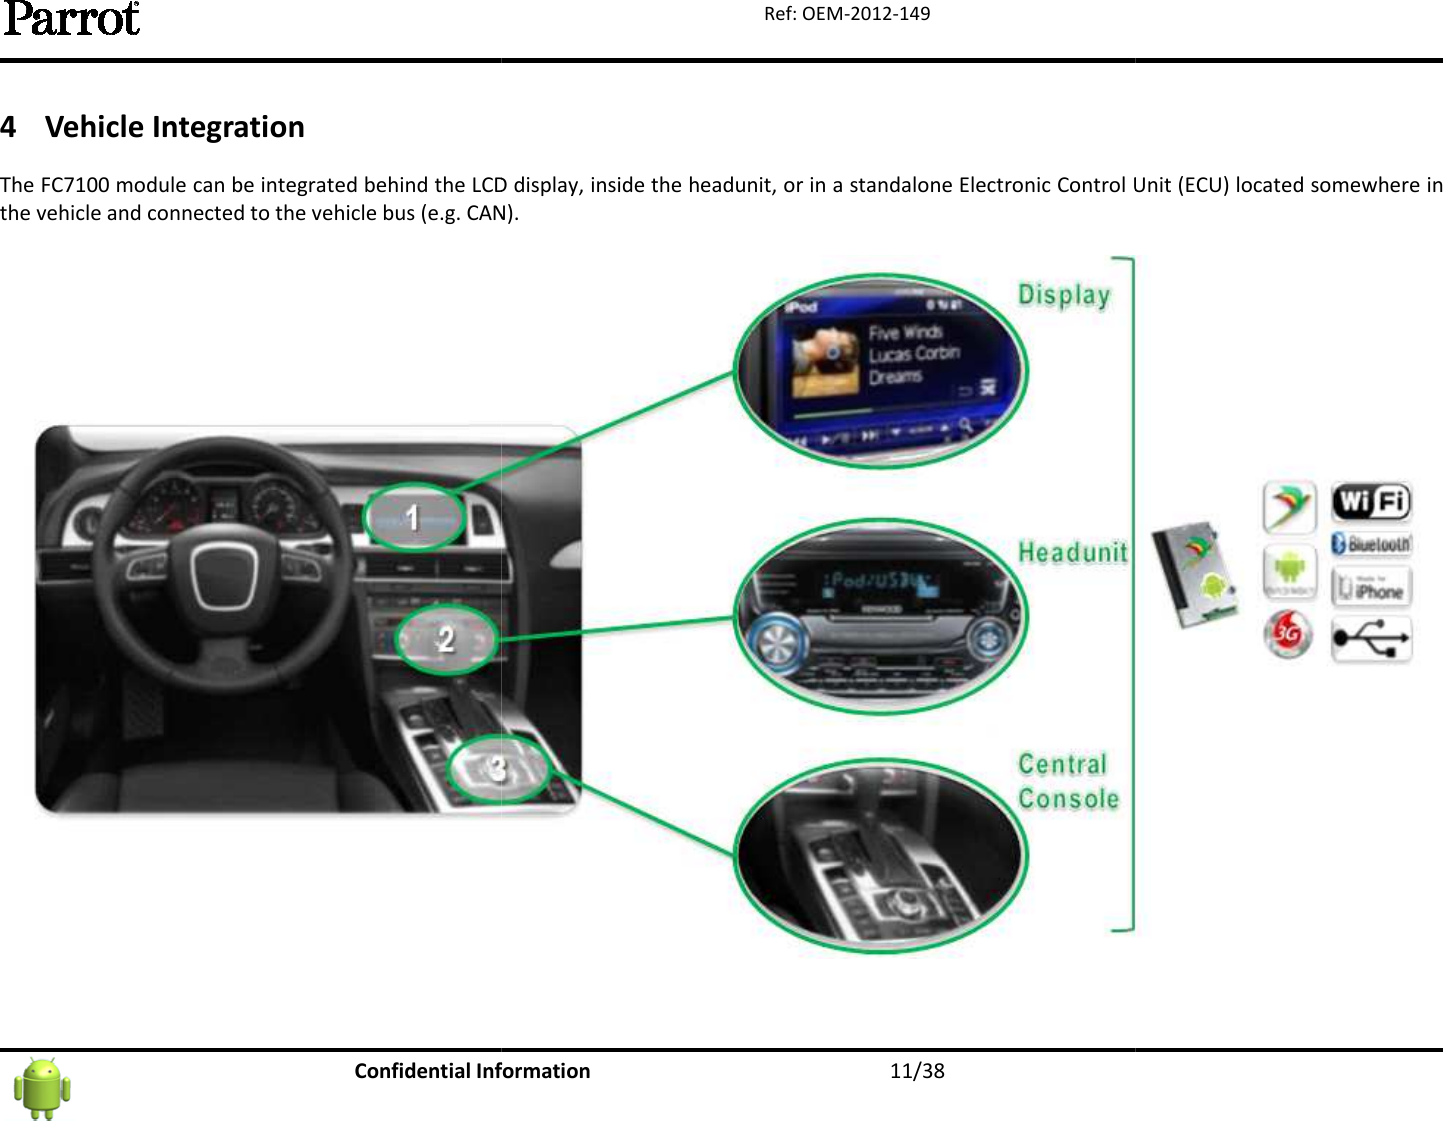   Confidential Information4 Vehicle Integration The FC7100 module can be integrated behind the LCD display, inside the headunit, or in a standalone Electronic Control Unit (ECU) locatethe vehicle and connected to the vehicle bus (e.g. CAN). Information  11/38 Ref: OEM-2012-149 module can be integrated behind the LCD display, inside the headunit, or in a standalone Electronic Control Unit (ECU) locatethe vehicle and connected to the vehicle bus (e.g. CAN).   module can be integrated behind the LCD display, inside the headunit, or in a standalone Electronic Control Unit (ECU) located somewhere in  